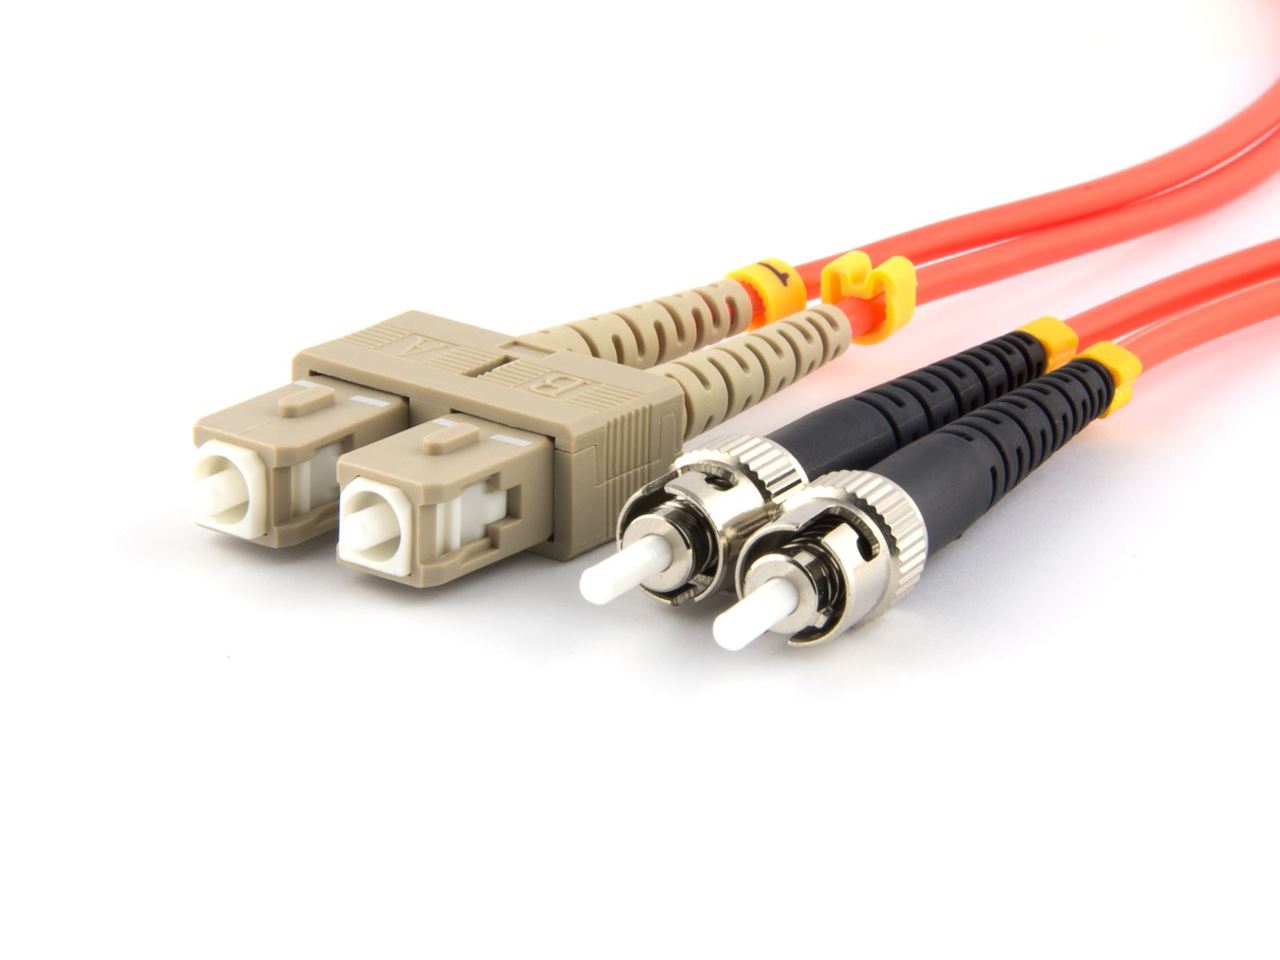 30 Meter LC to SC Cable, Multimode Duplex OM1 Patch Cord